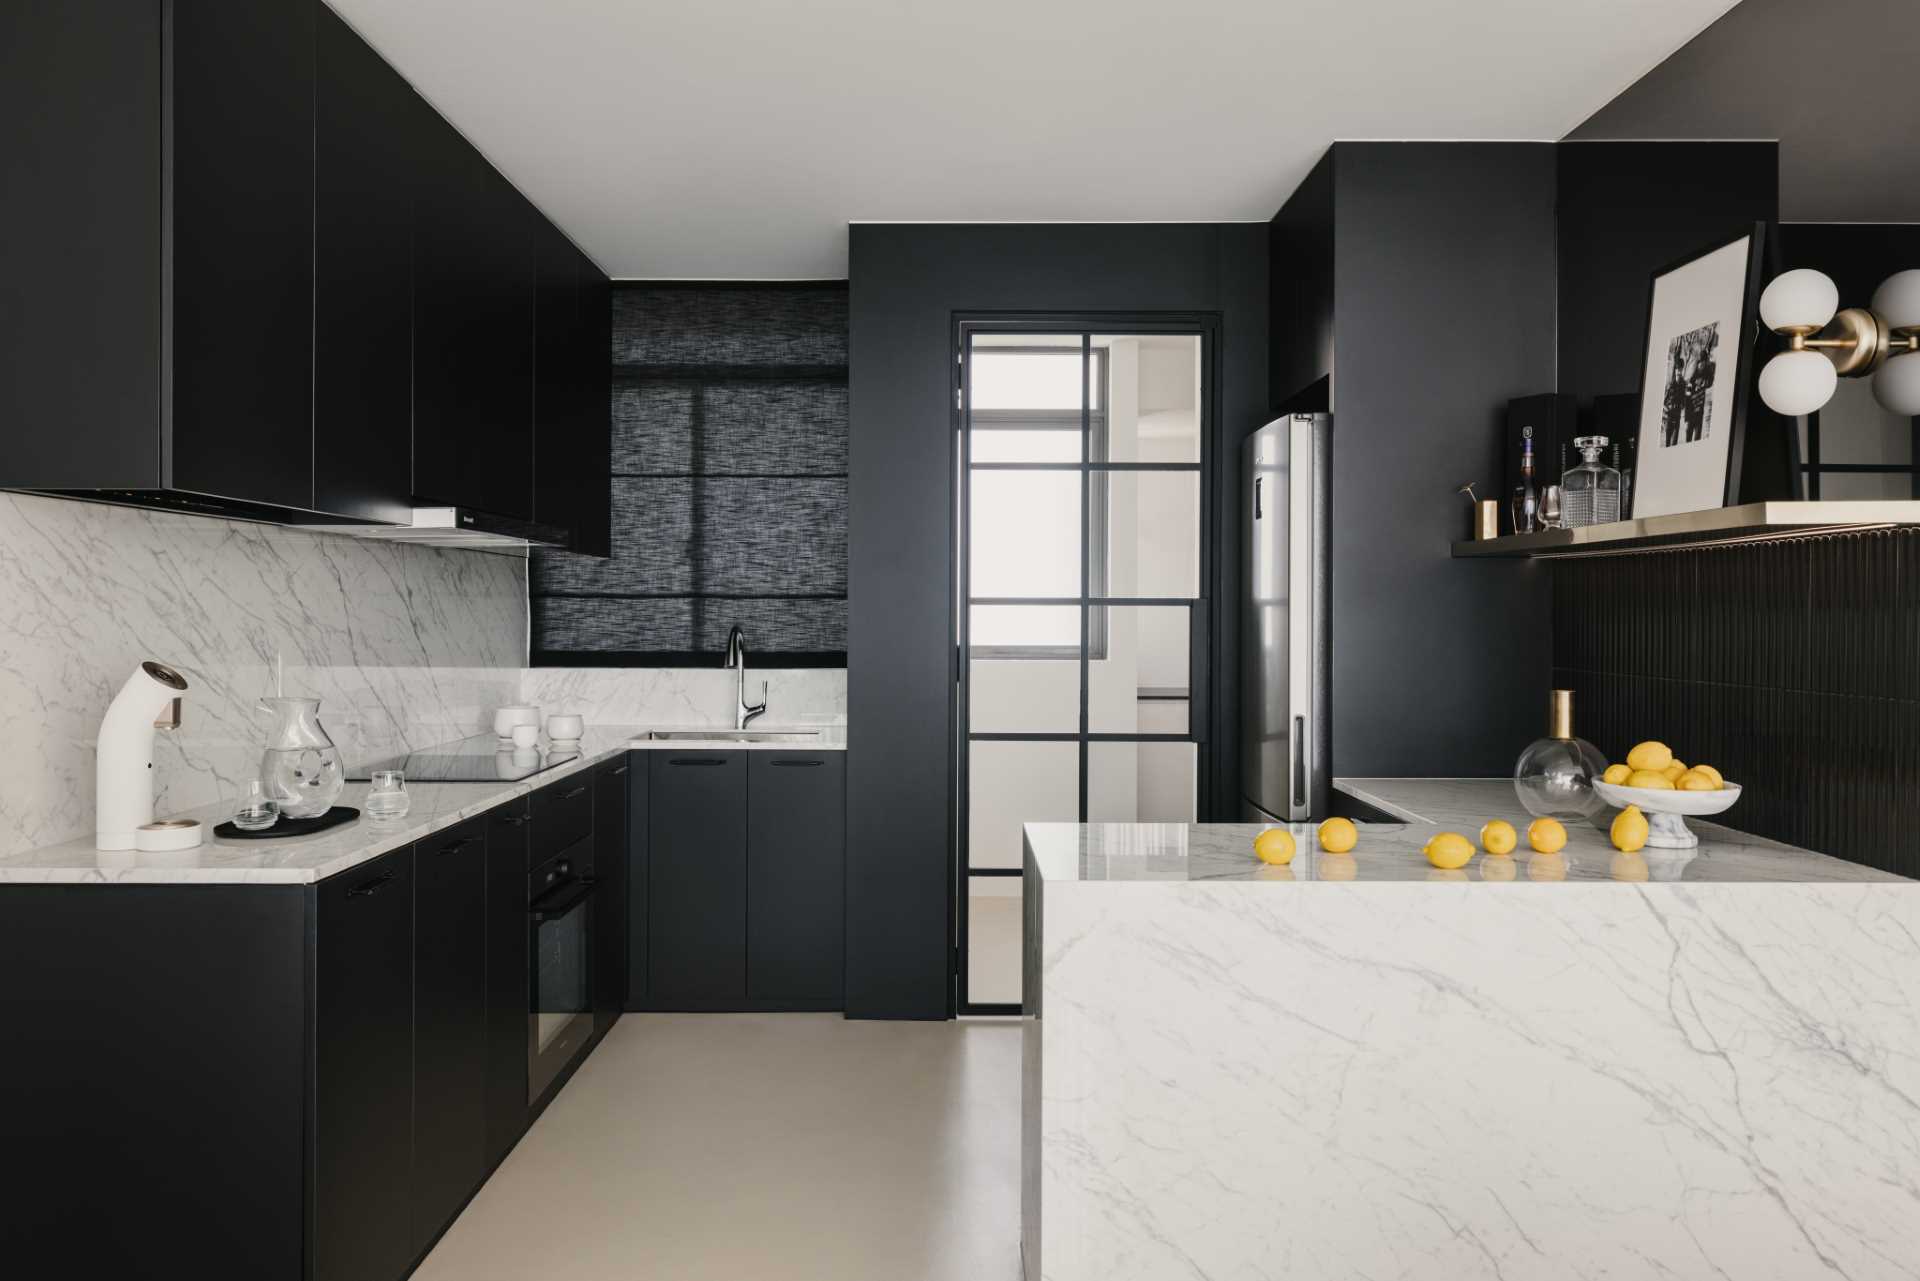 In this black and white kitchen, matte black cabinets and walls contrast the countertops and backsplash. Tiles and a blind add a textural element, while a mirrored area of the wall adds a touch of elegance and makes the ،e feel larger.